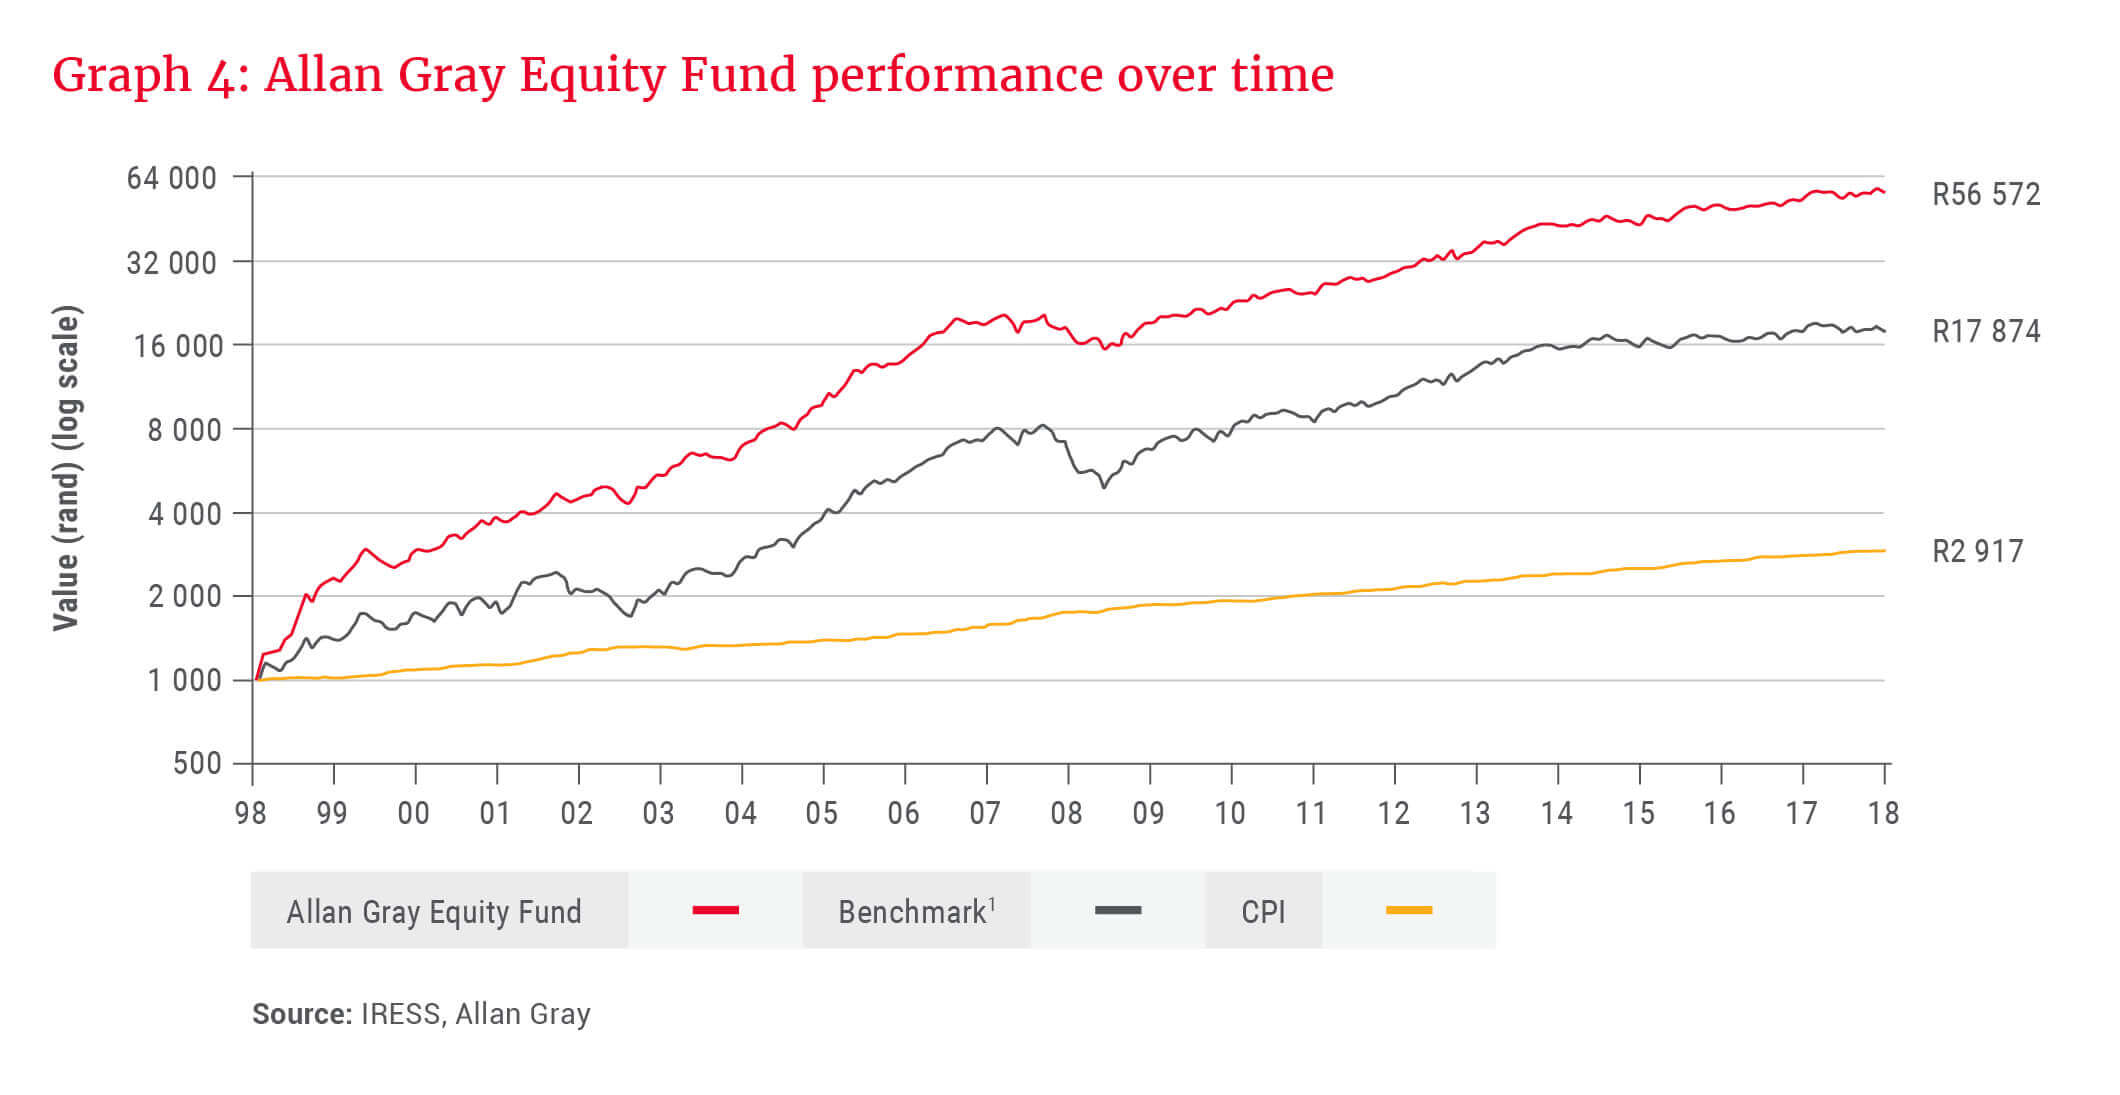 Allan Gray Equity Fund performance over time